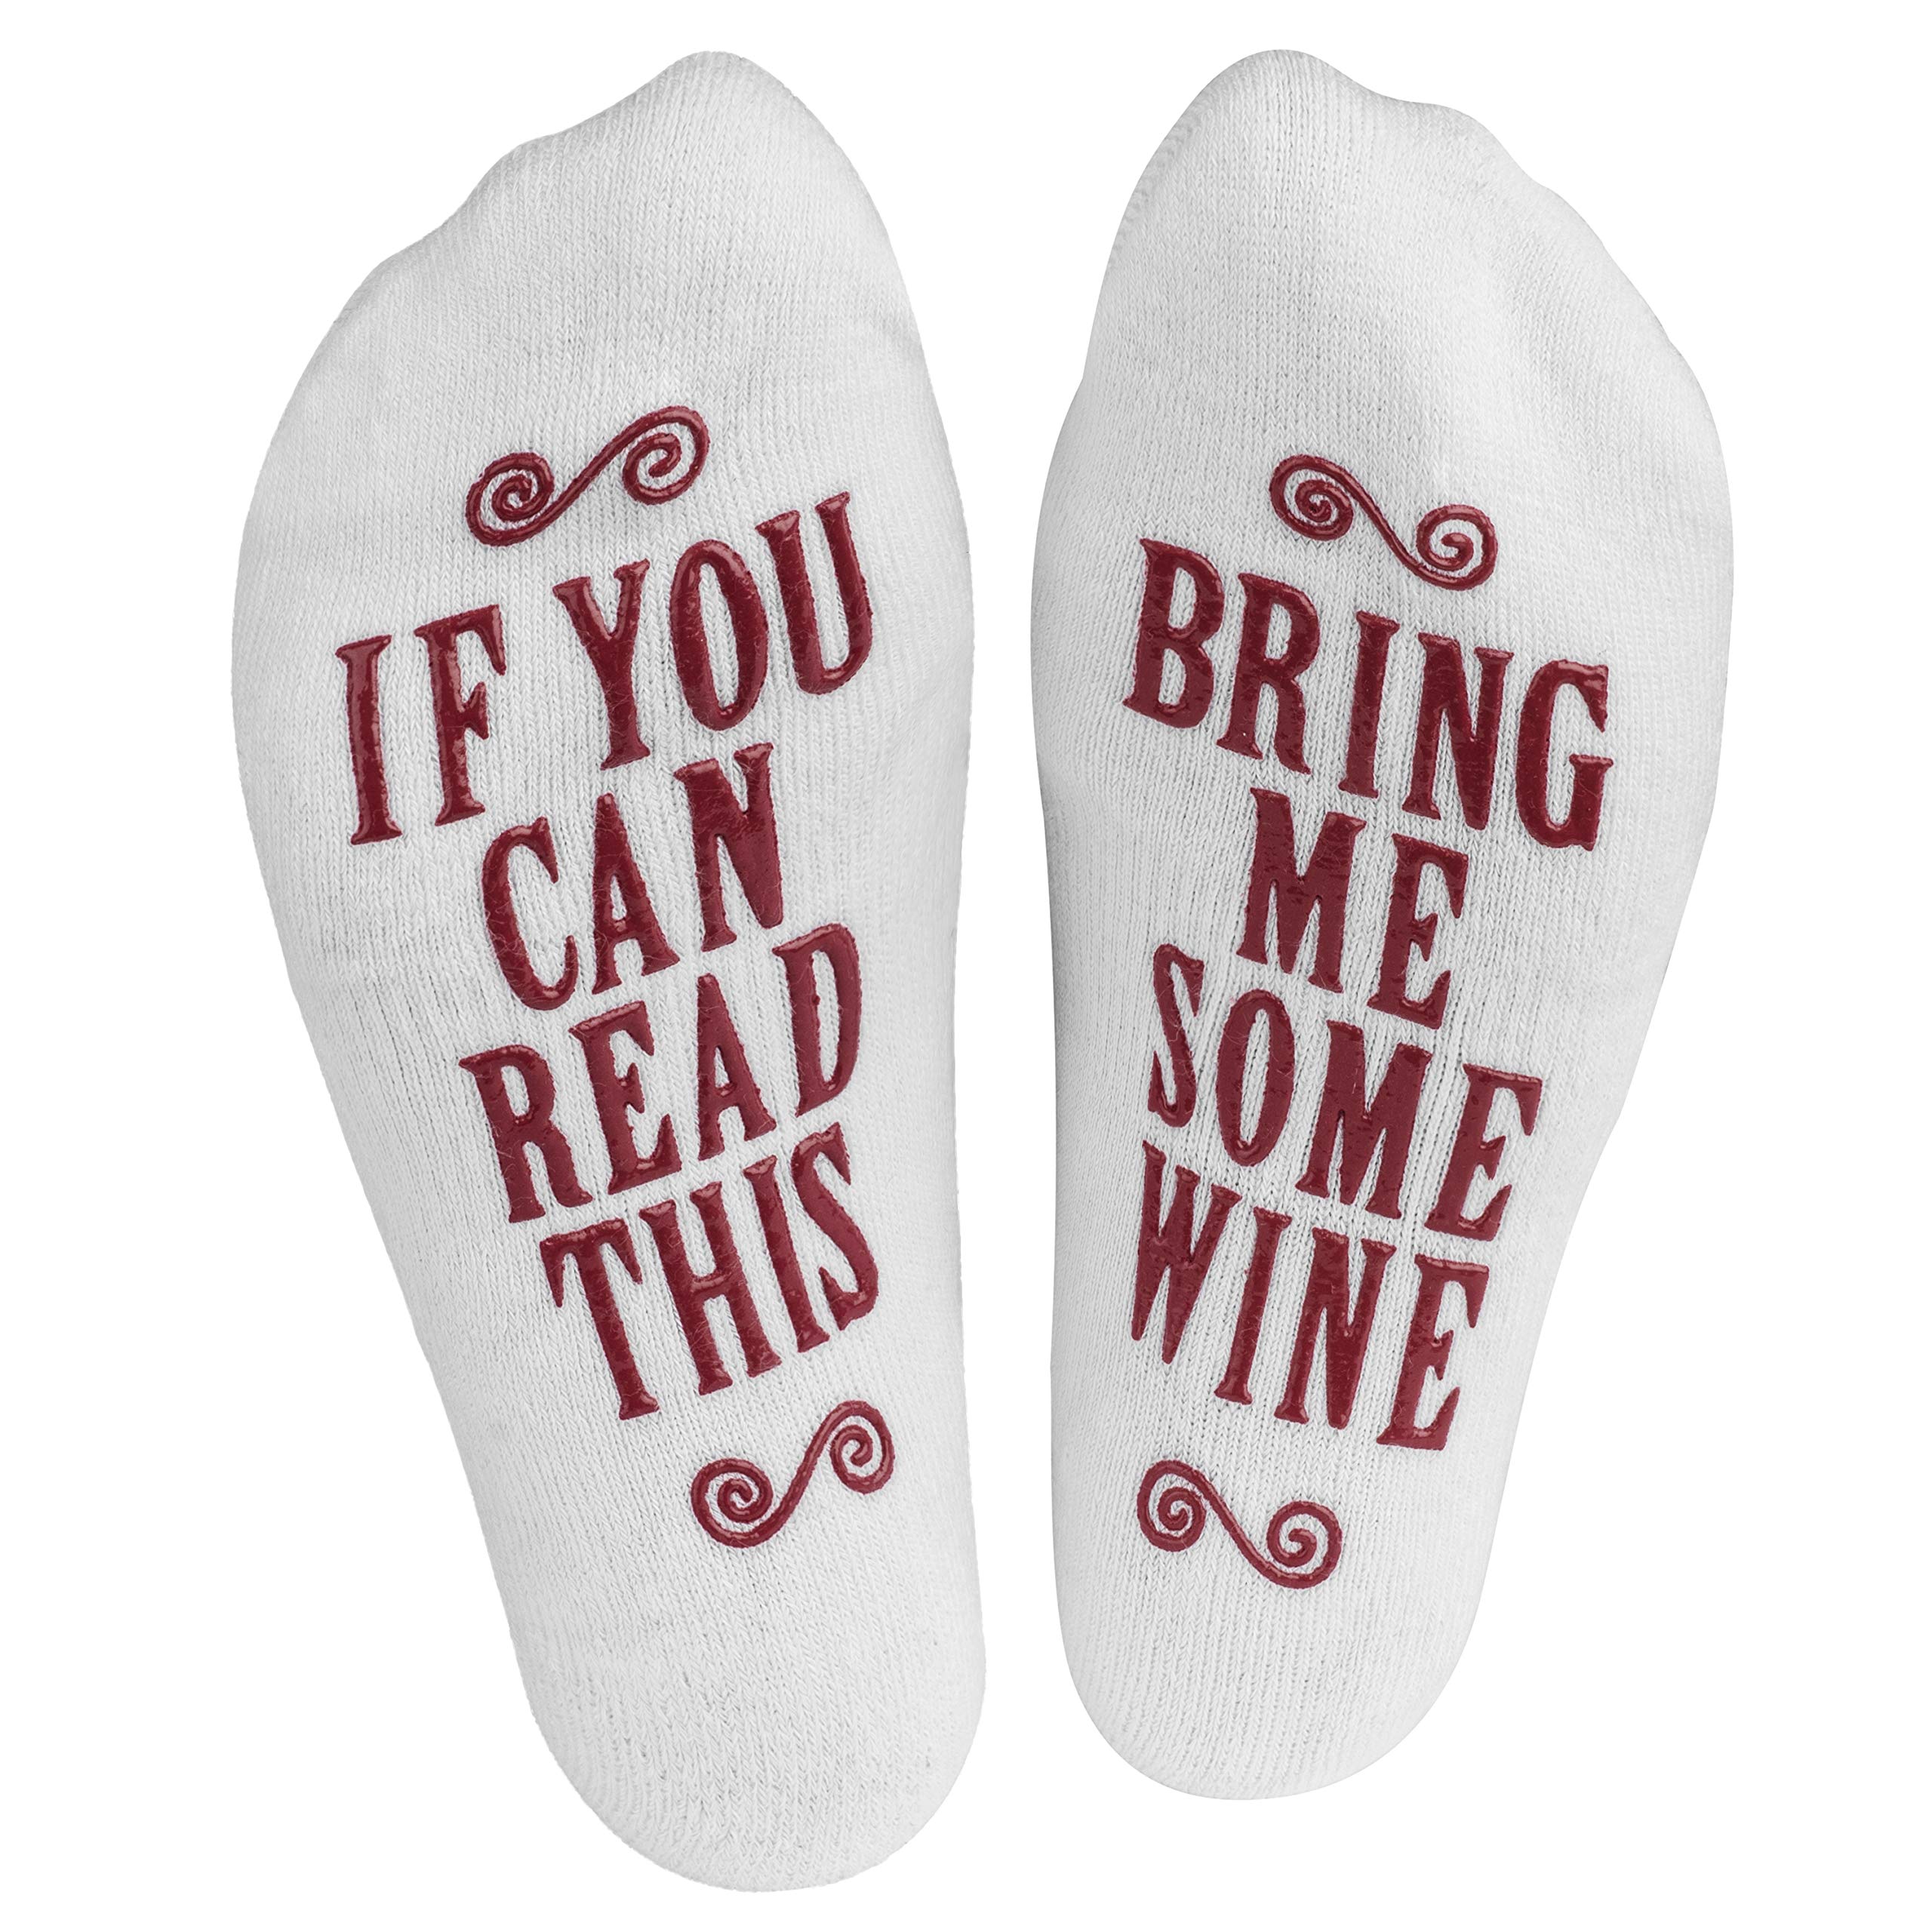 Book Cover Haute Soiree Women's Novelty Socks - “If You Can Read This, Bring Me Some” - One Size Fits All Burgundy Wine